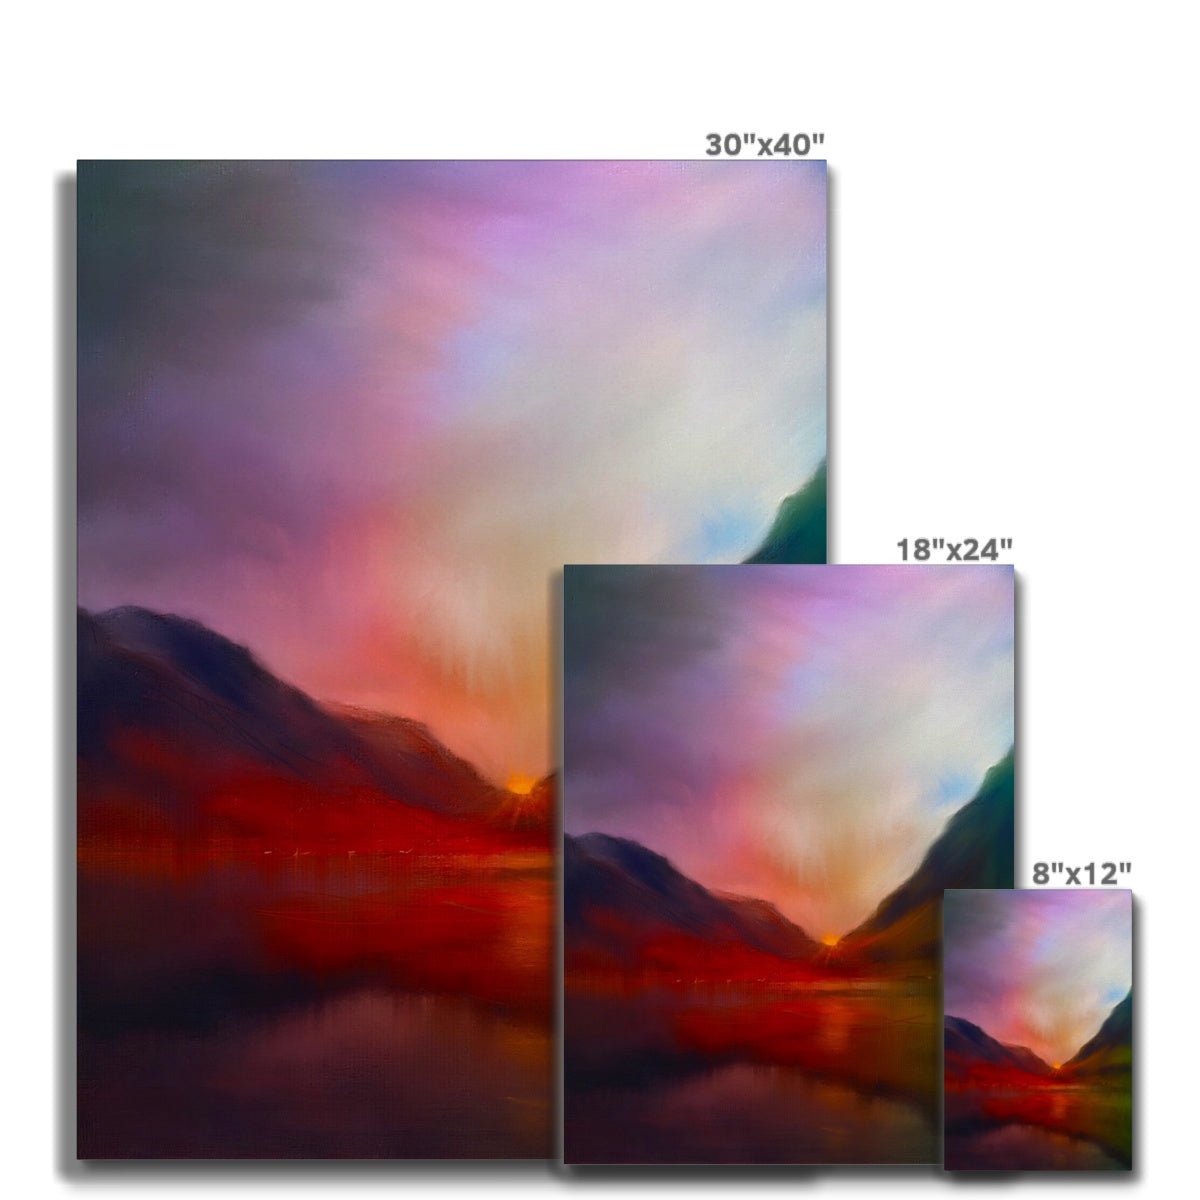 Glencoe Sunset Painting | Canvas From Scotland-Contemporary Stretched Canvas Prints-Glencoe Art Gallery-Paintings, Prints, Homeware, Art Gifts From Scotland By Scottish Artist Kevin Hunter